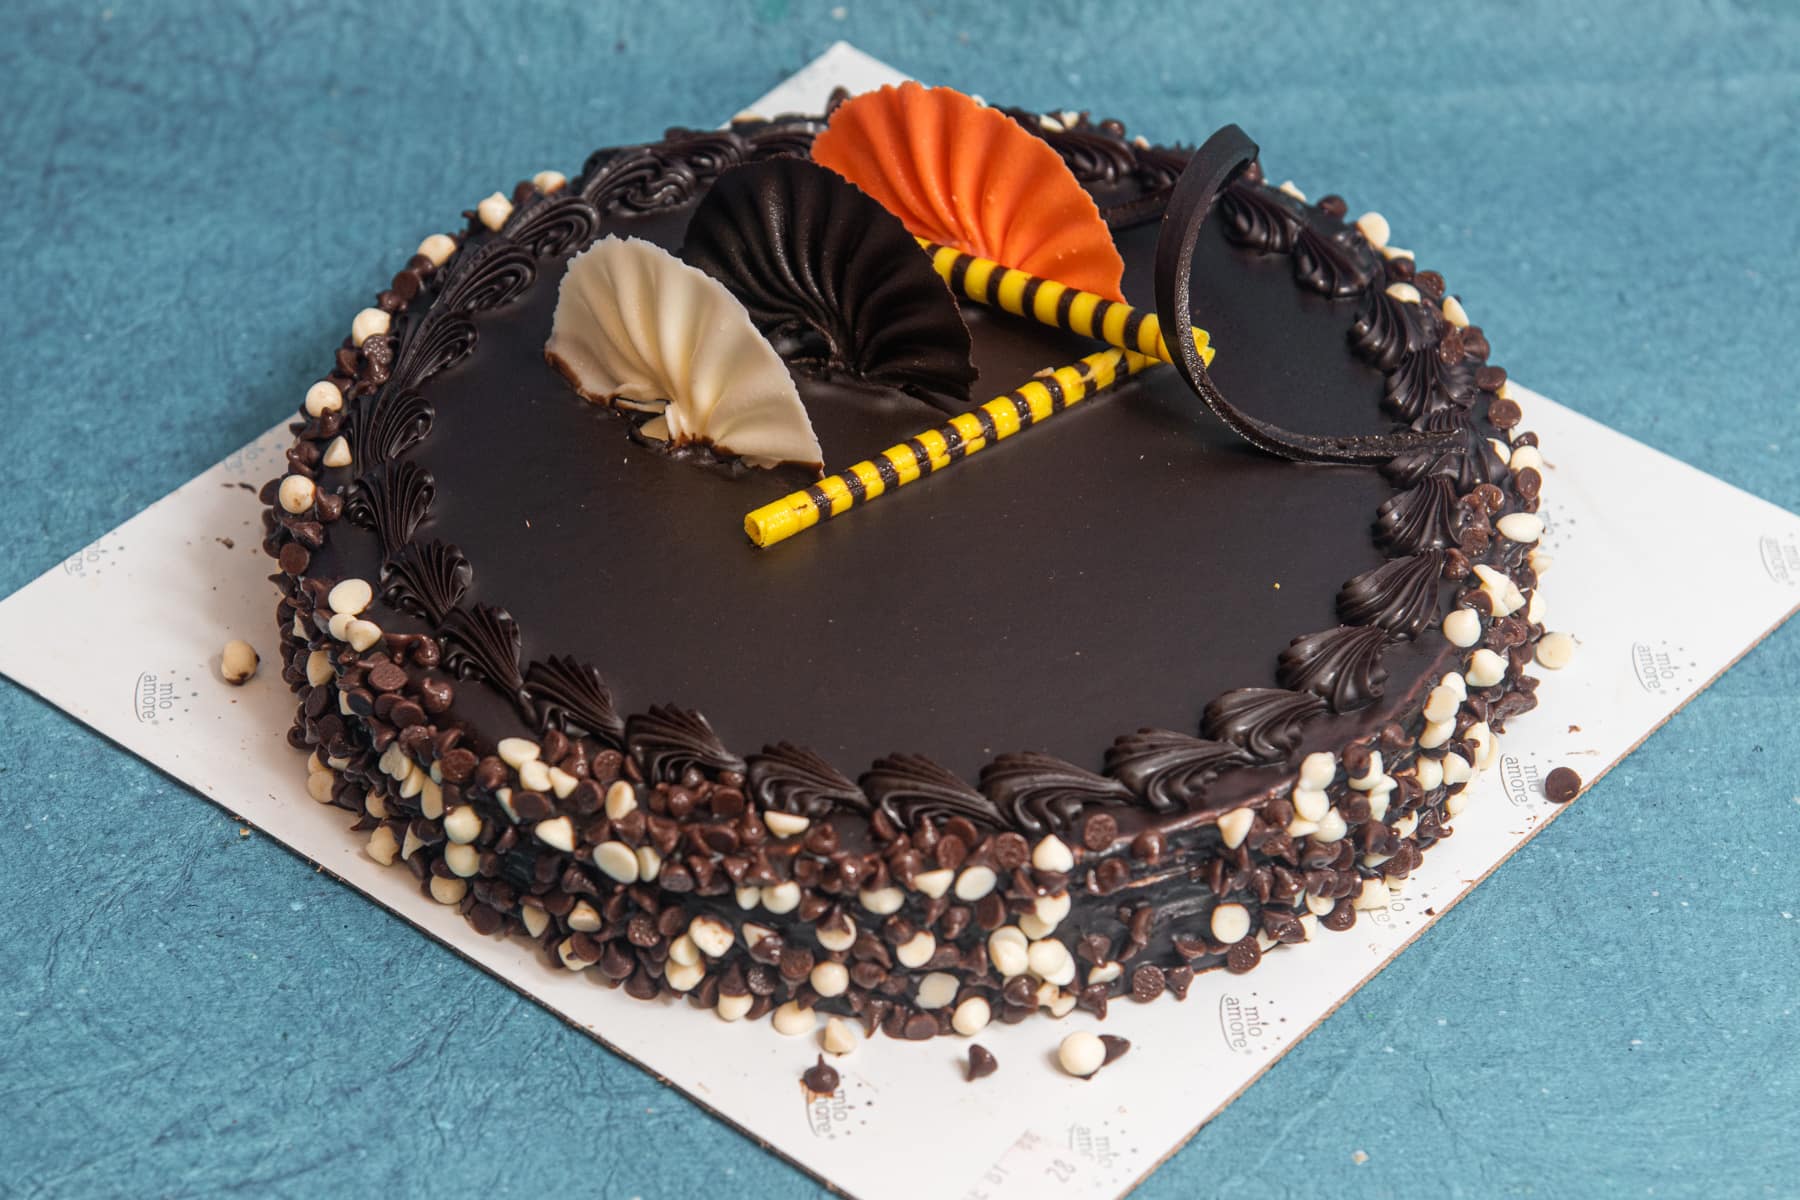 Buy Choco Chip Pastry Online| Online Cake Delivery - CakeBee